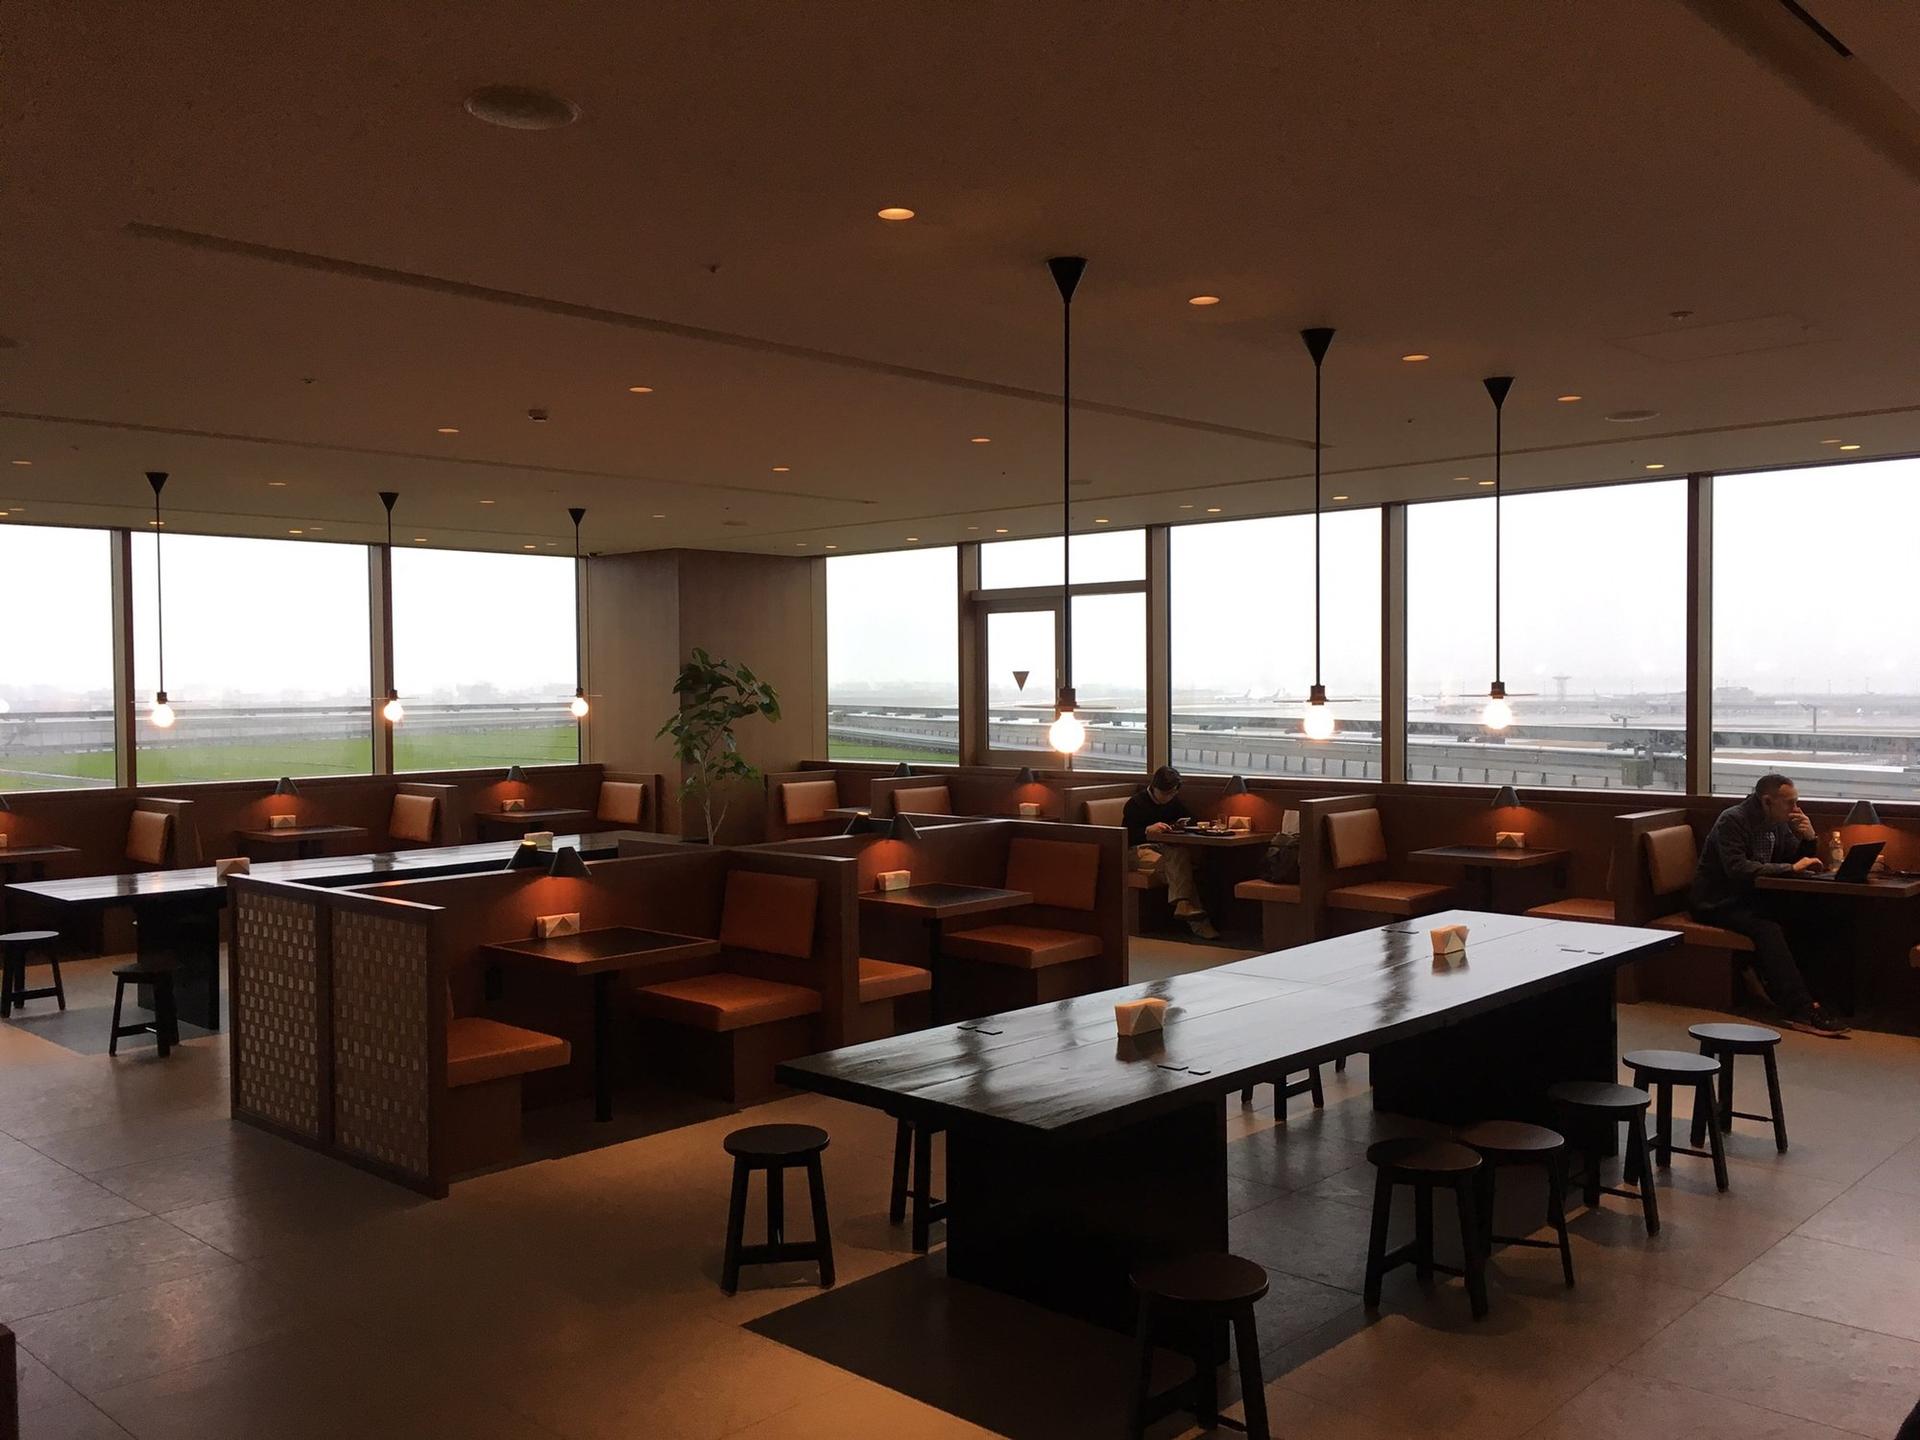 Cathay Pacific Lounge image 24 of 49